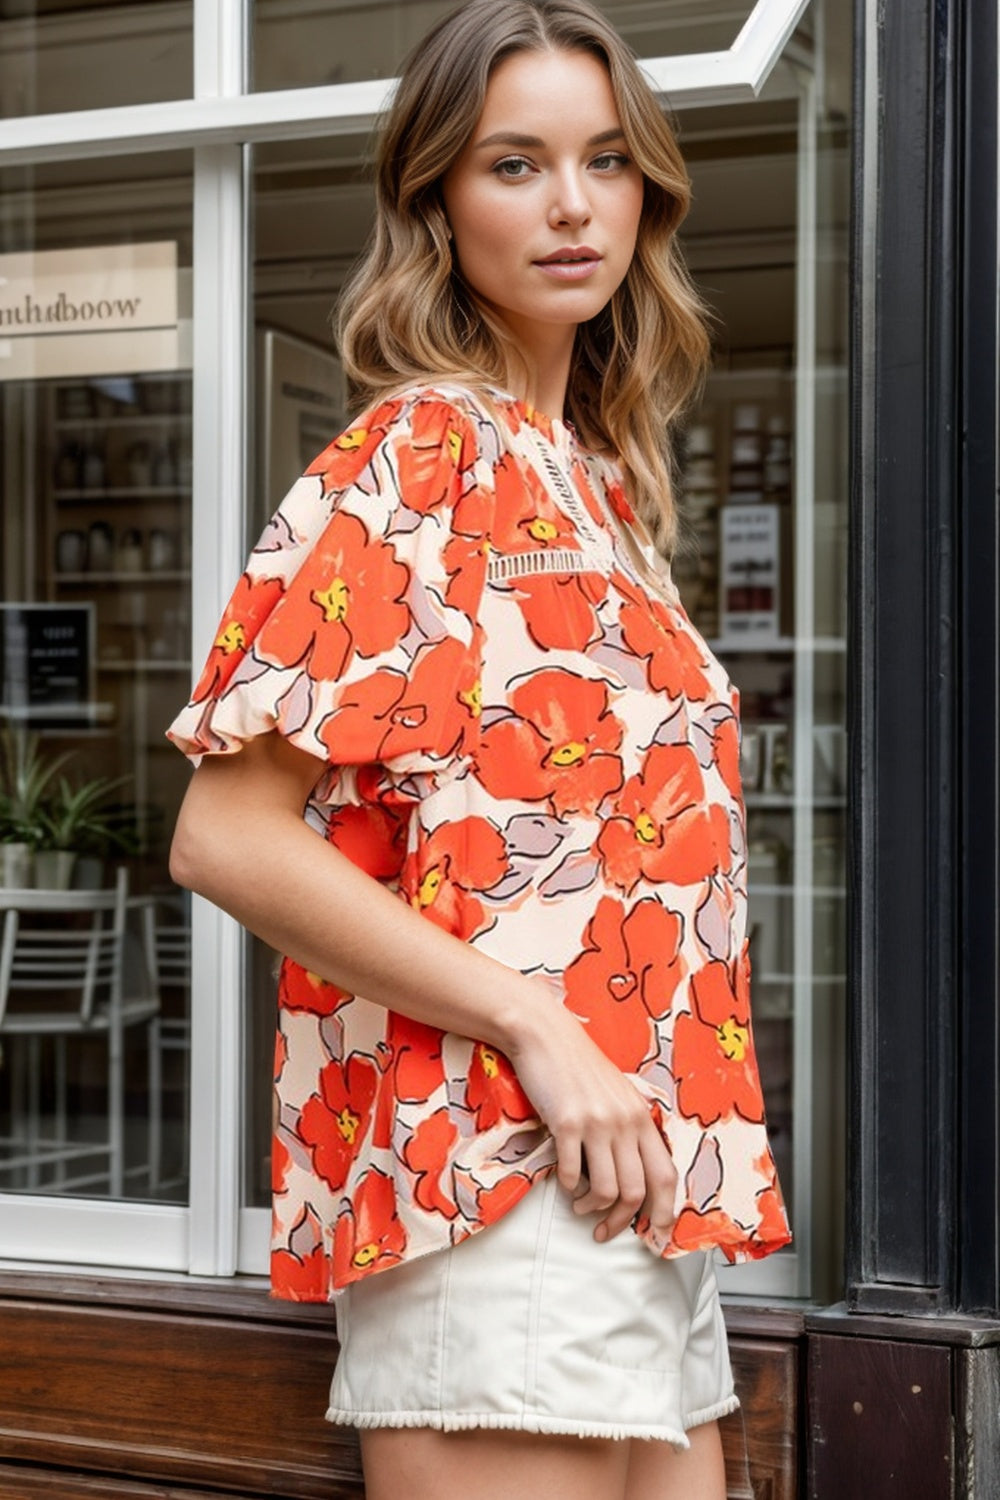 Fashionable Poppy Flower Printed Short Sleeve Blouse with Round Neck